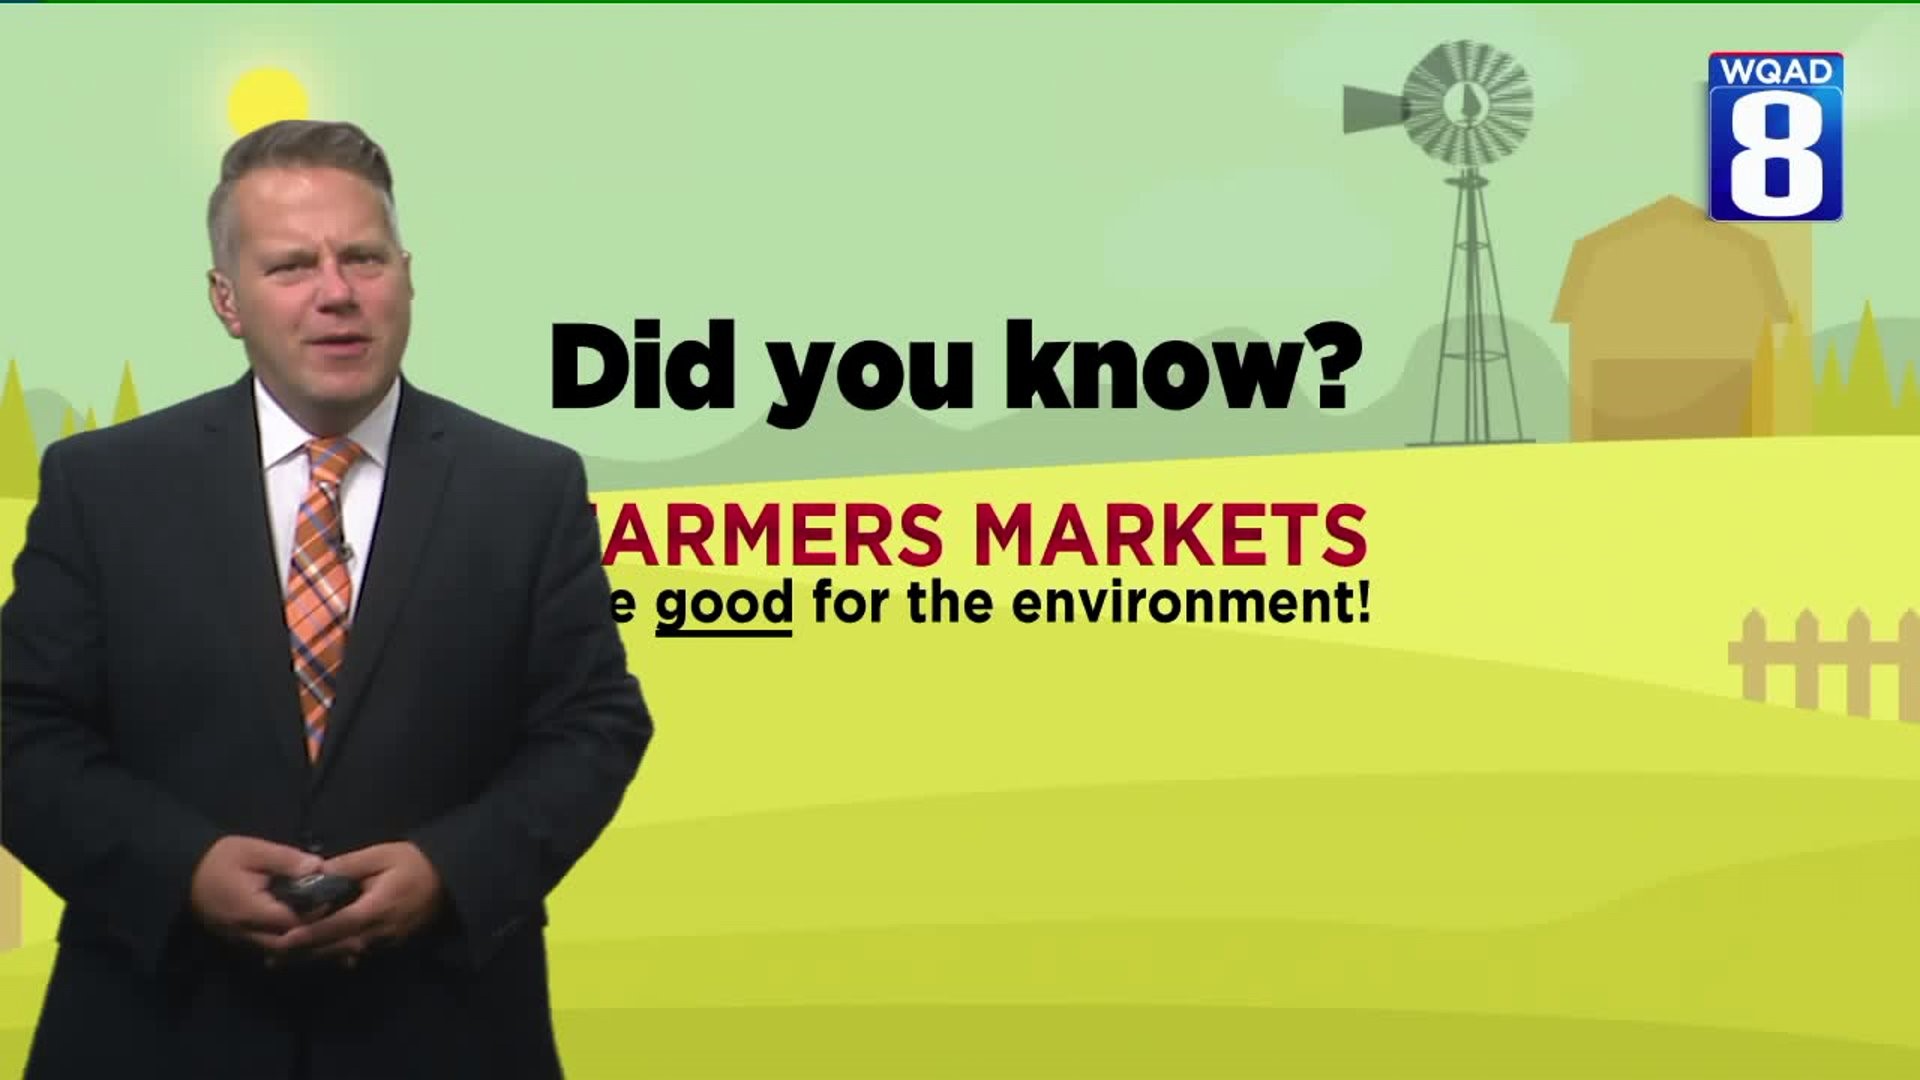 Eric explains the benefits of farmers markets